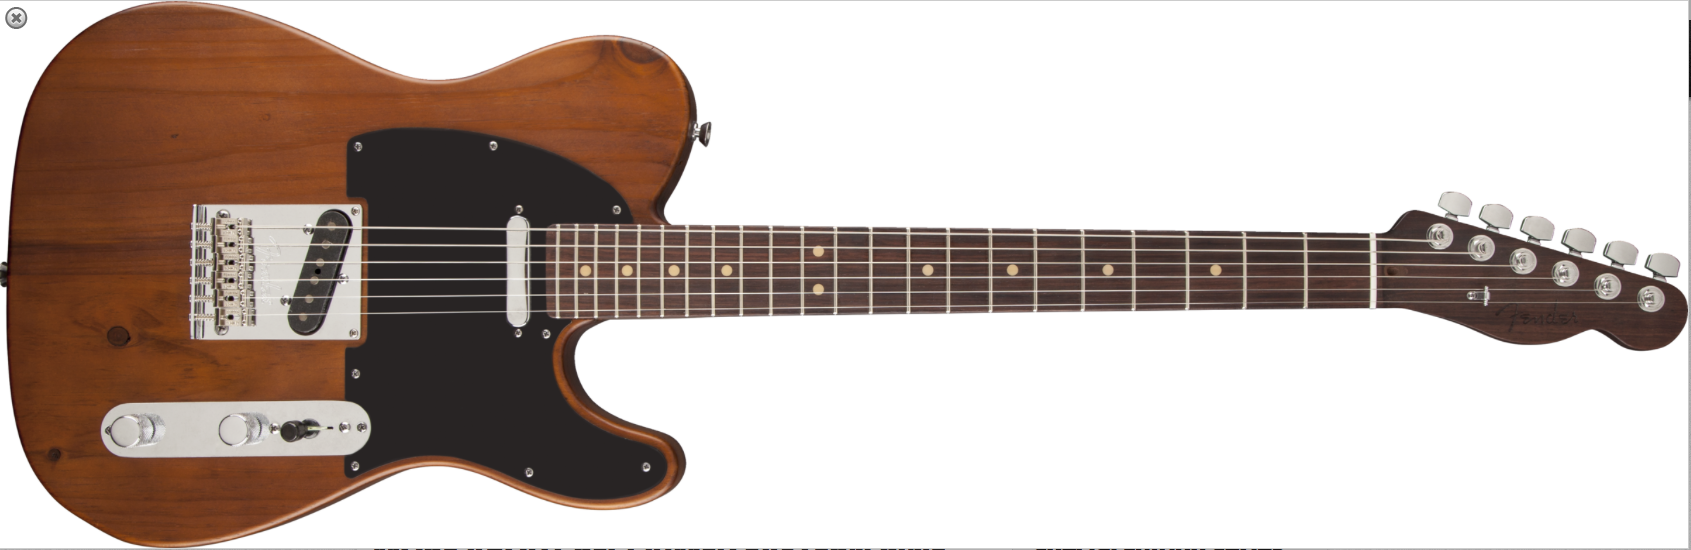 Fender Reclaimed Old Growth Redwood Stratocaster Banshee In Avalon Images - Fender, Transparent background PNG HD thumbnail